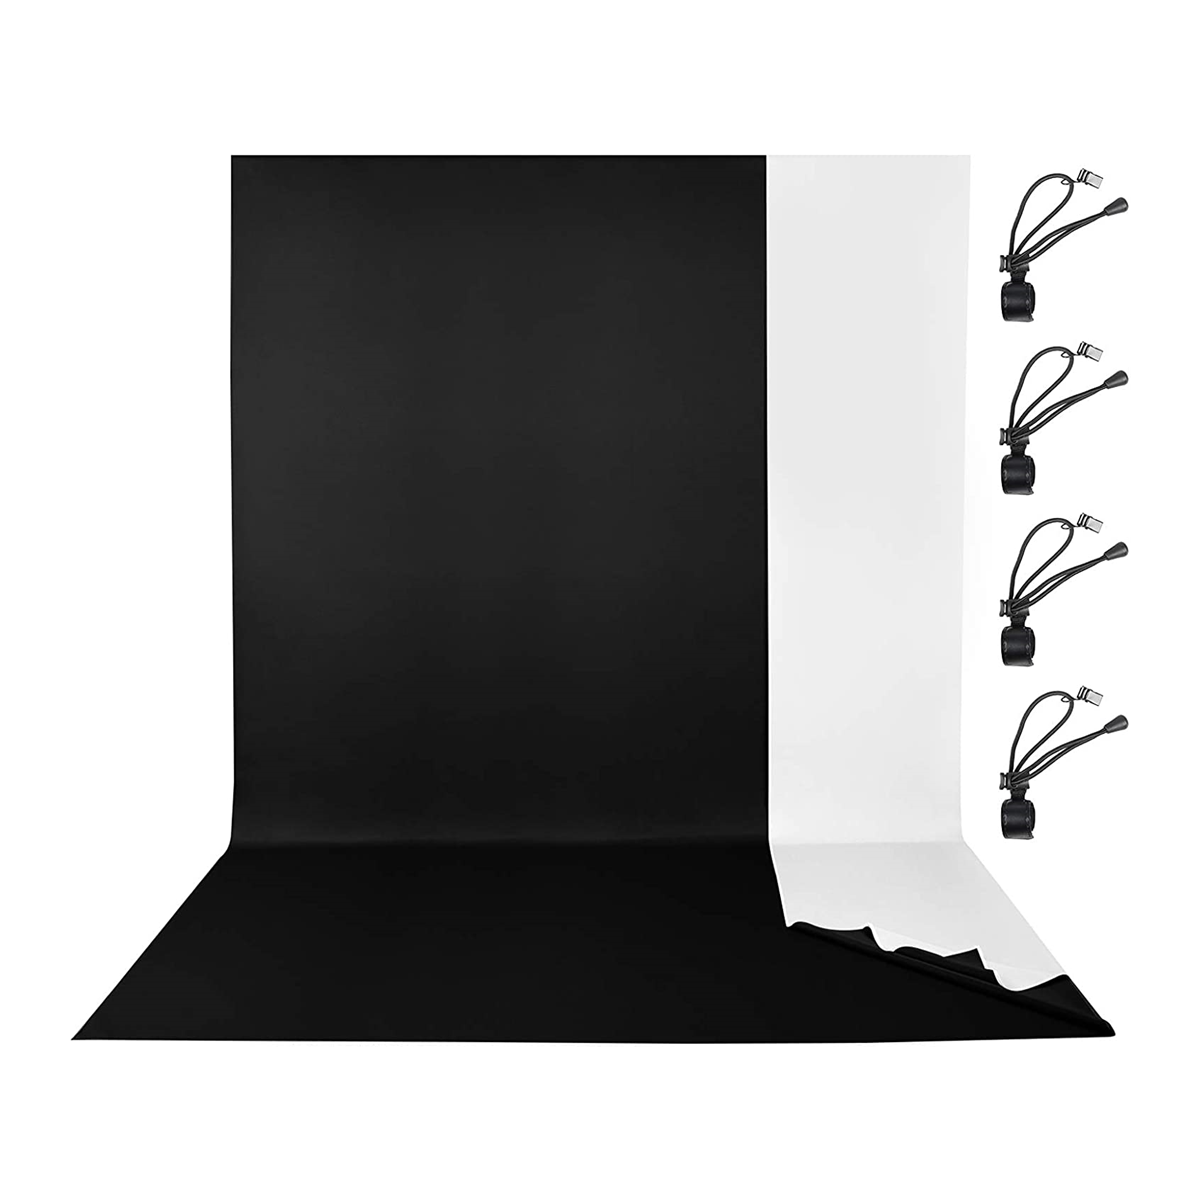 EMART 2-in-1 Photo Backdrop, Wrinkle-Free Polyester-Cotton Background, 6 x 9 ft